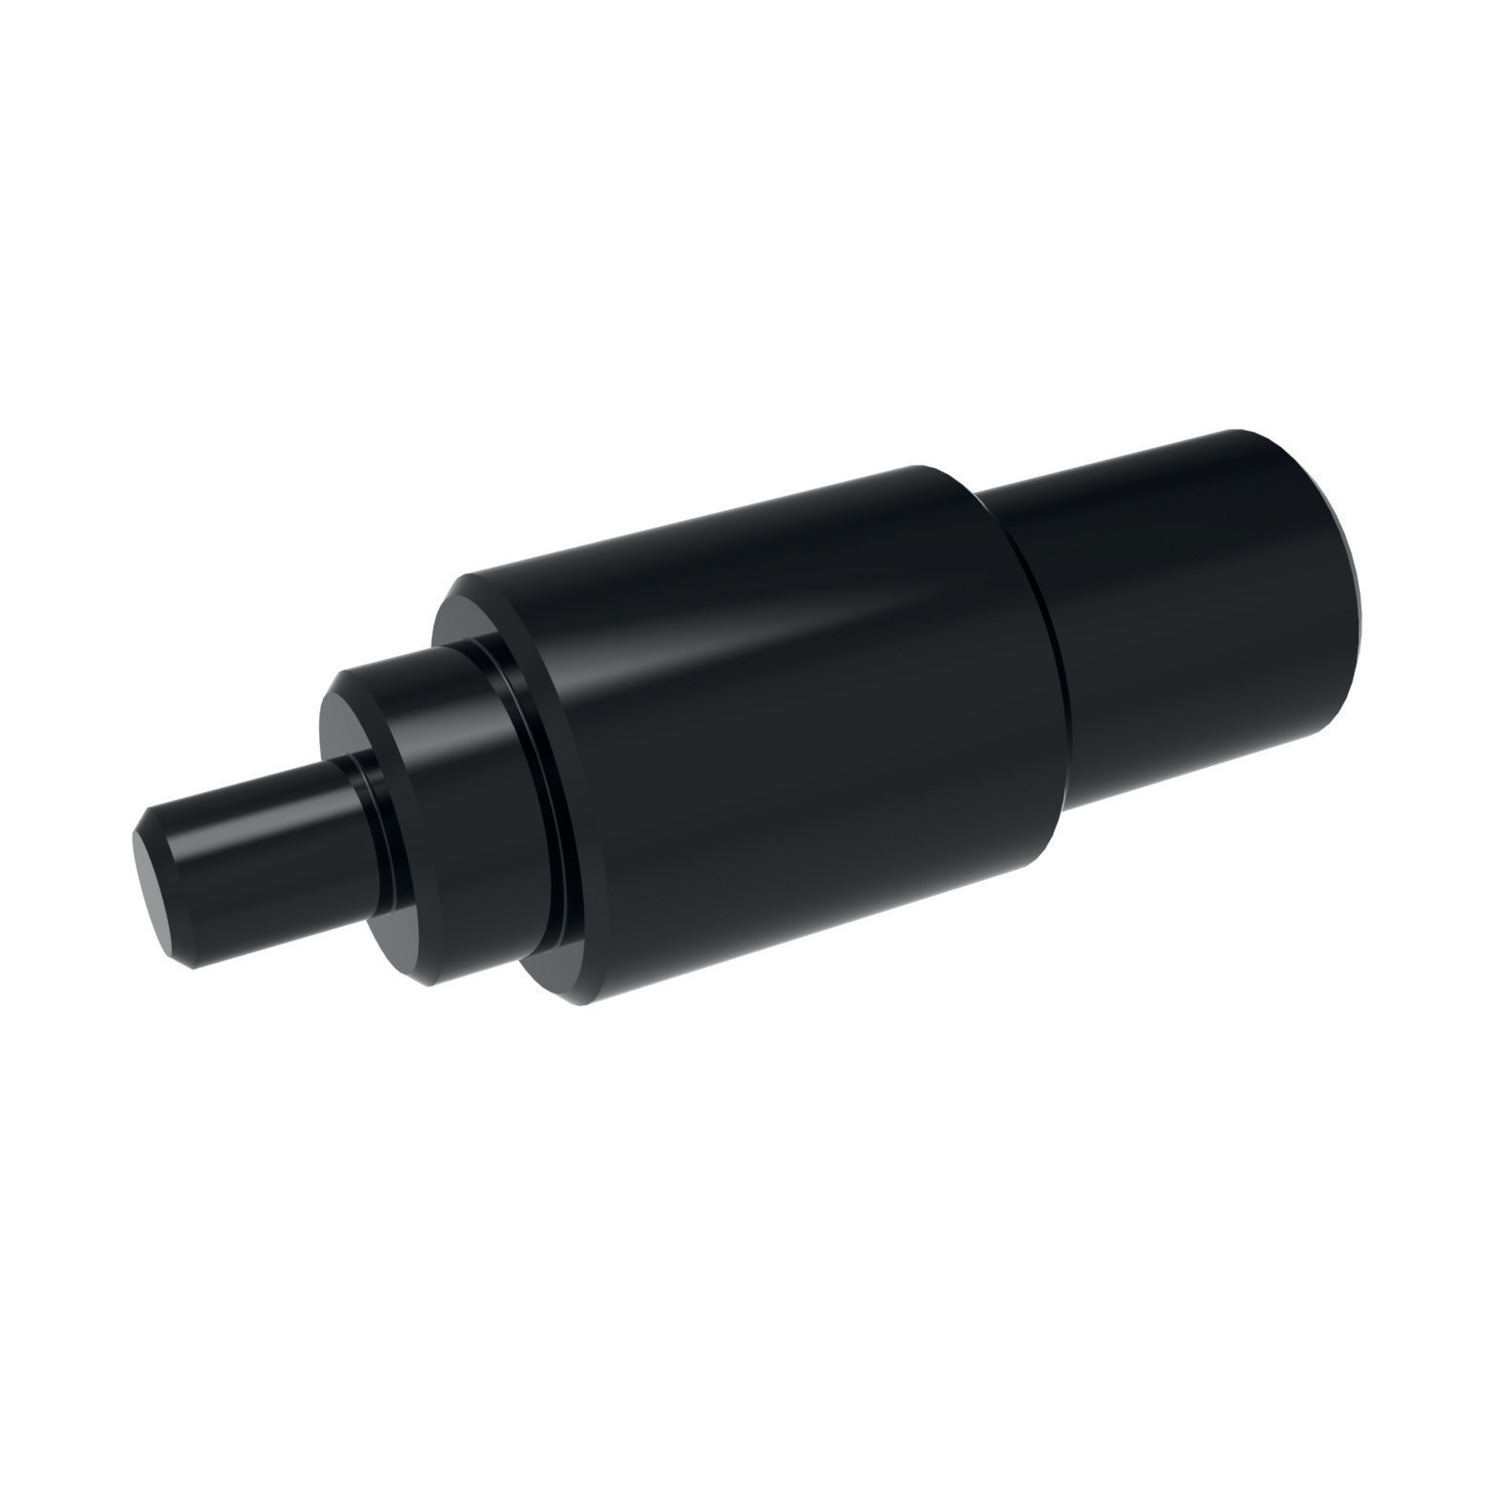 Product P0088.1, Installation Tool - Metric - Thinwall for threaded inserts P0084.1 & P0084.2 / 